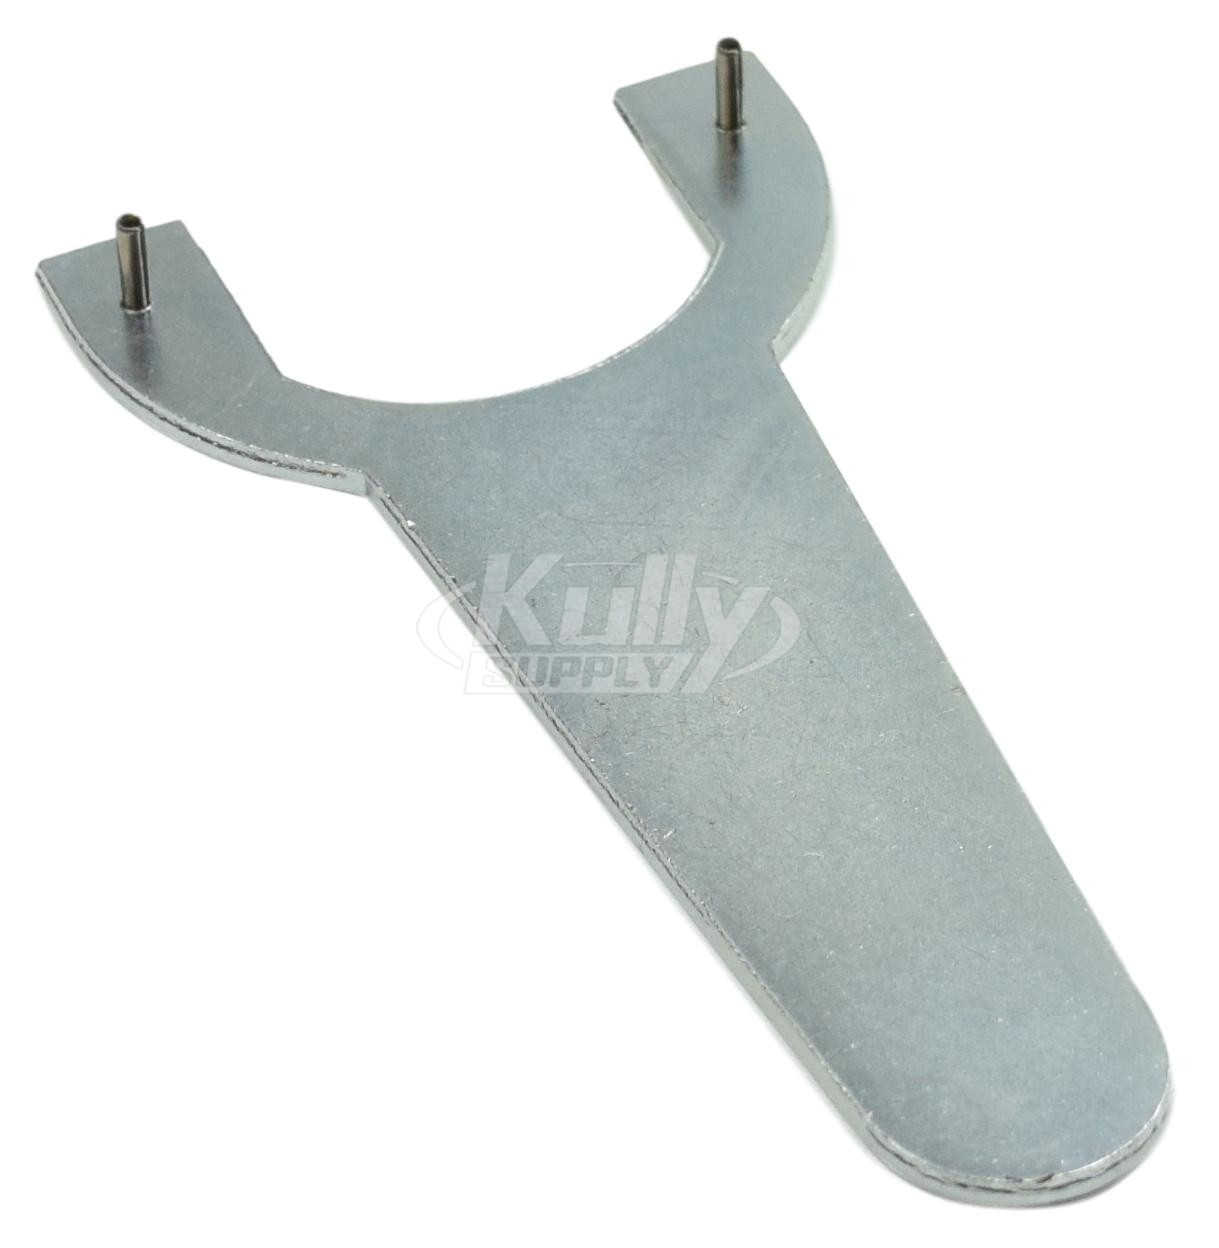 Zurn P6000-N1B-W Wall Flange Wrench (for Access Panels)